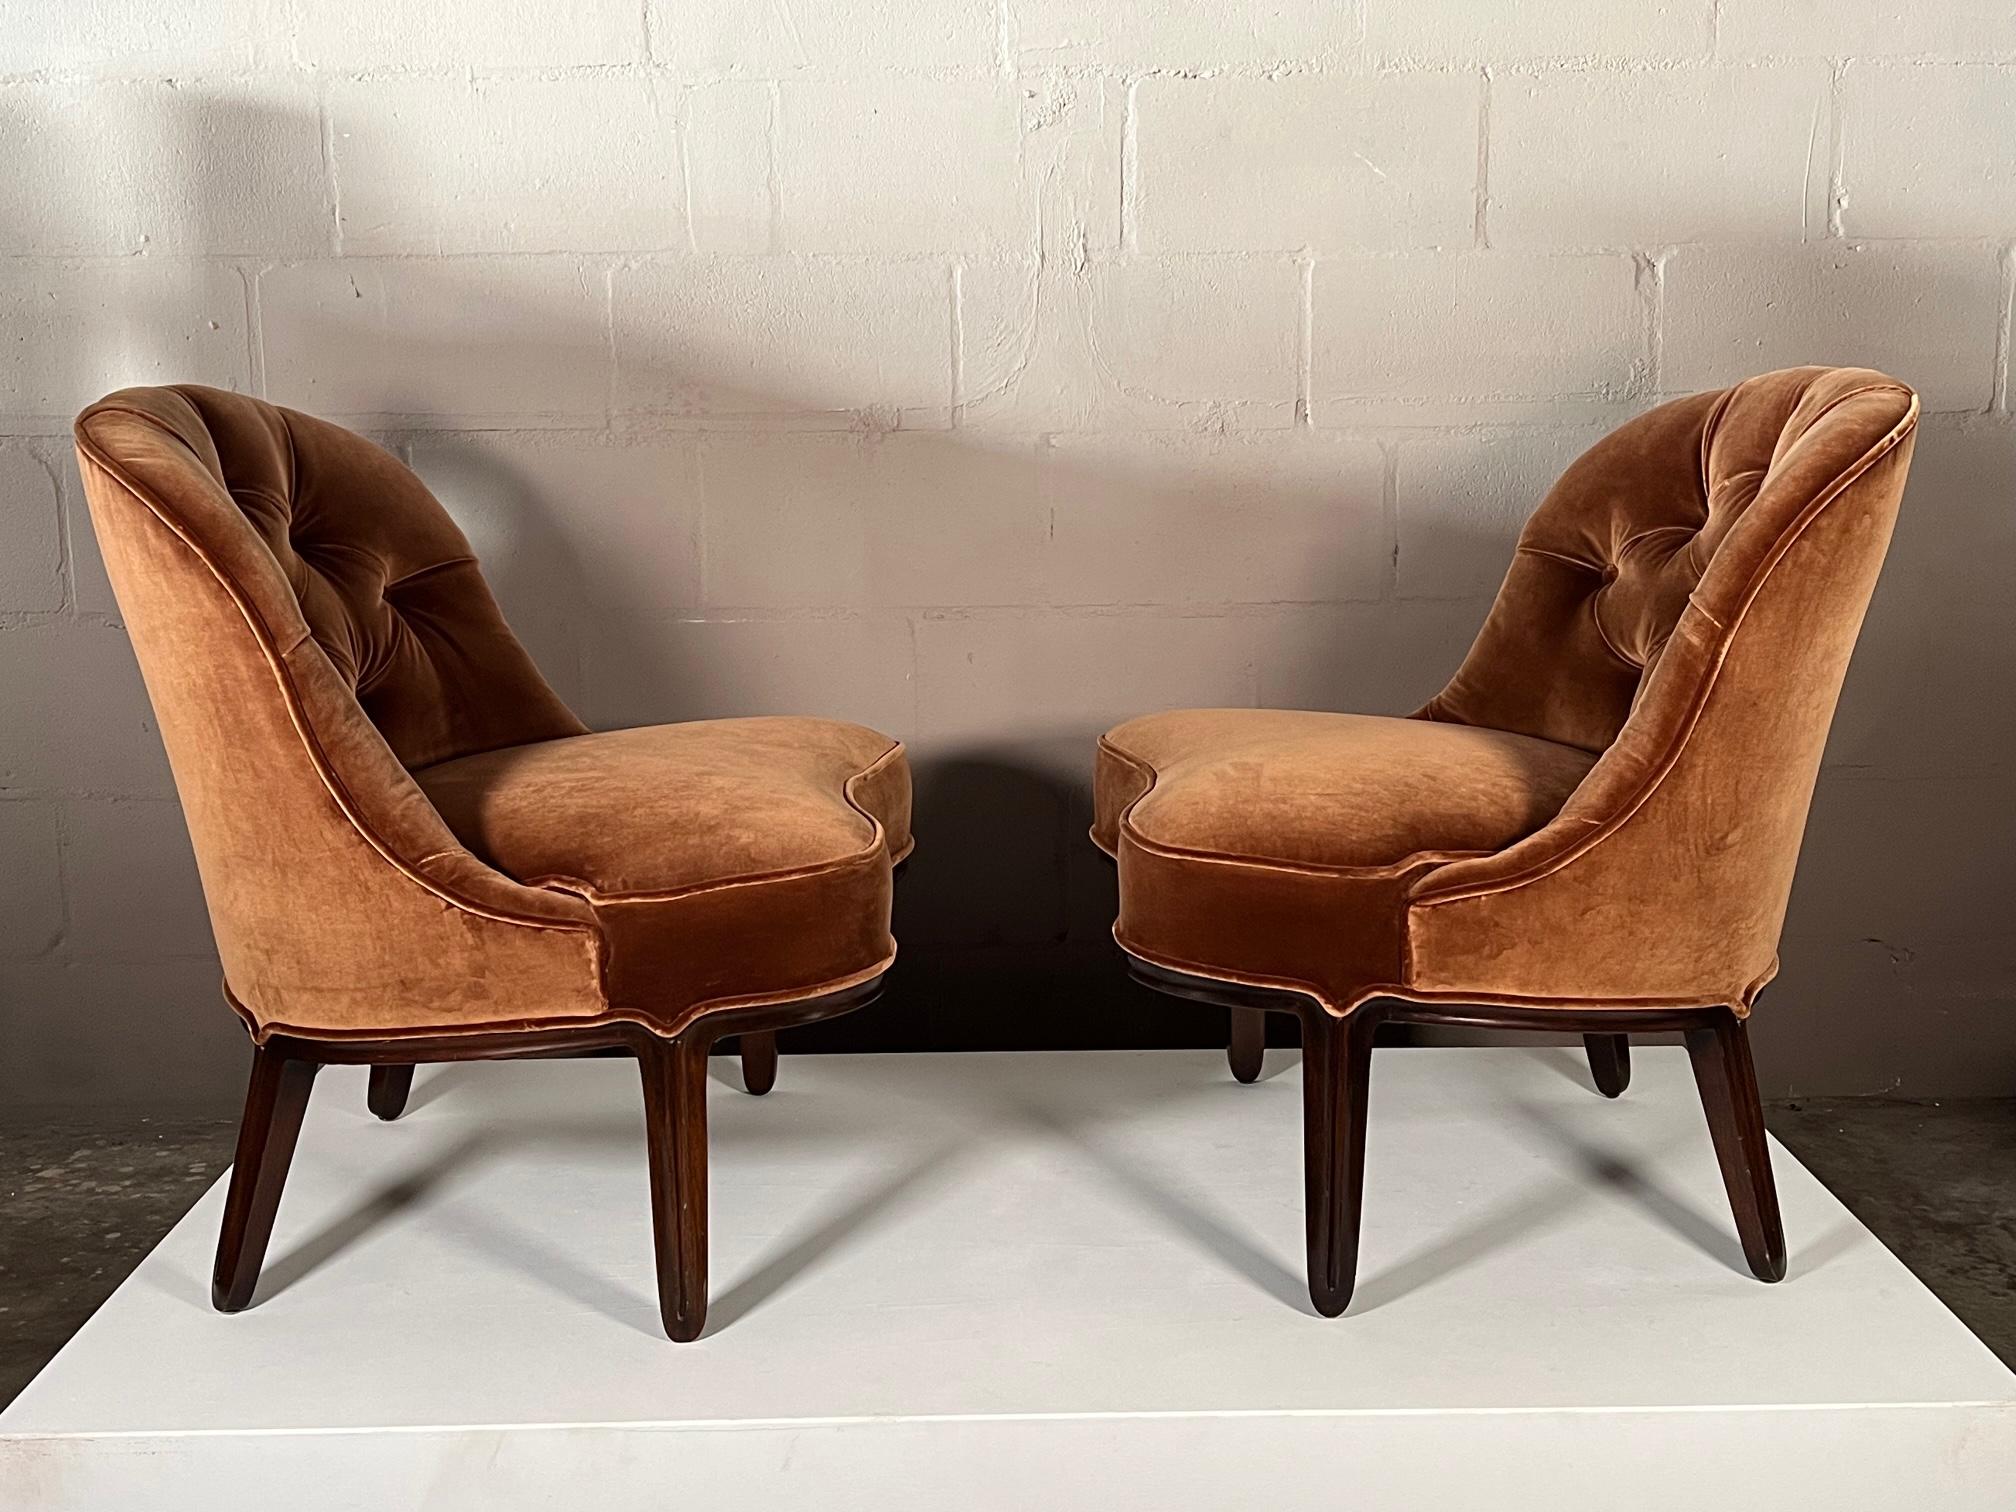 Stylish and elegant slipper chairs by Edward Wormley for Dunbar ca' 1950's. Upholstered in Fret custom Italian silk velvet, luxurious to the touch, (samples available). Chocolate brandy color, varies with light. Frames have original factory finish.